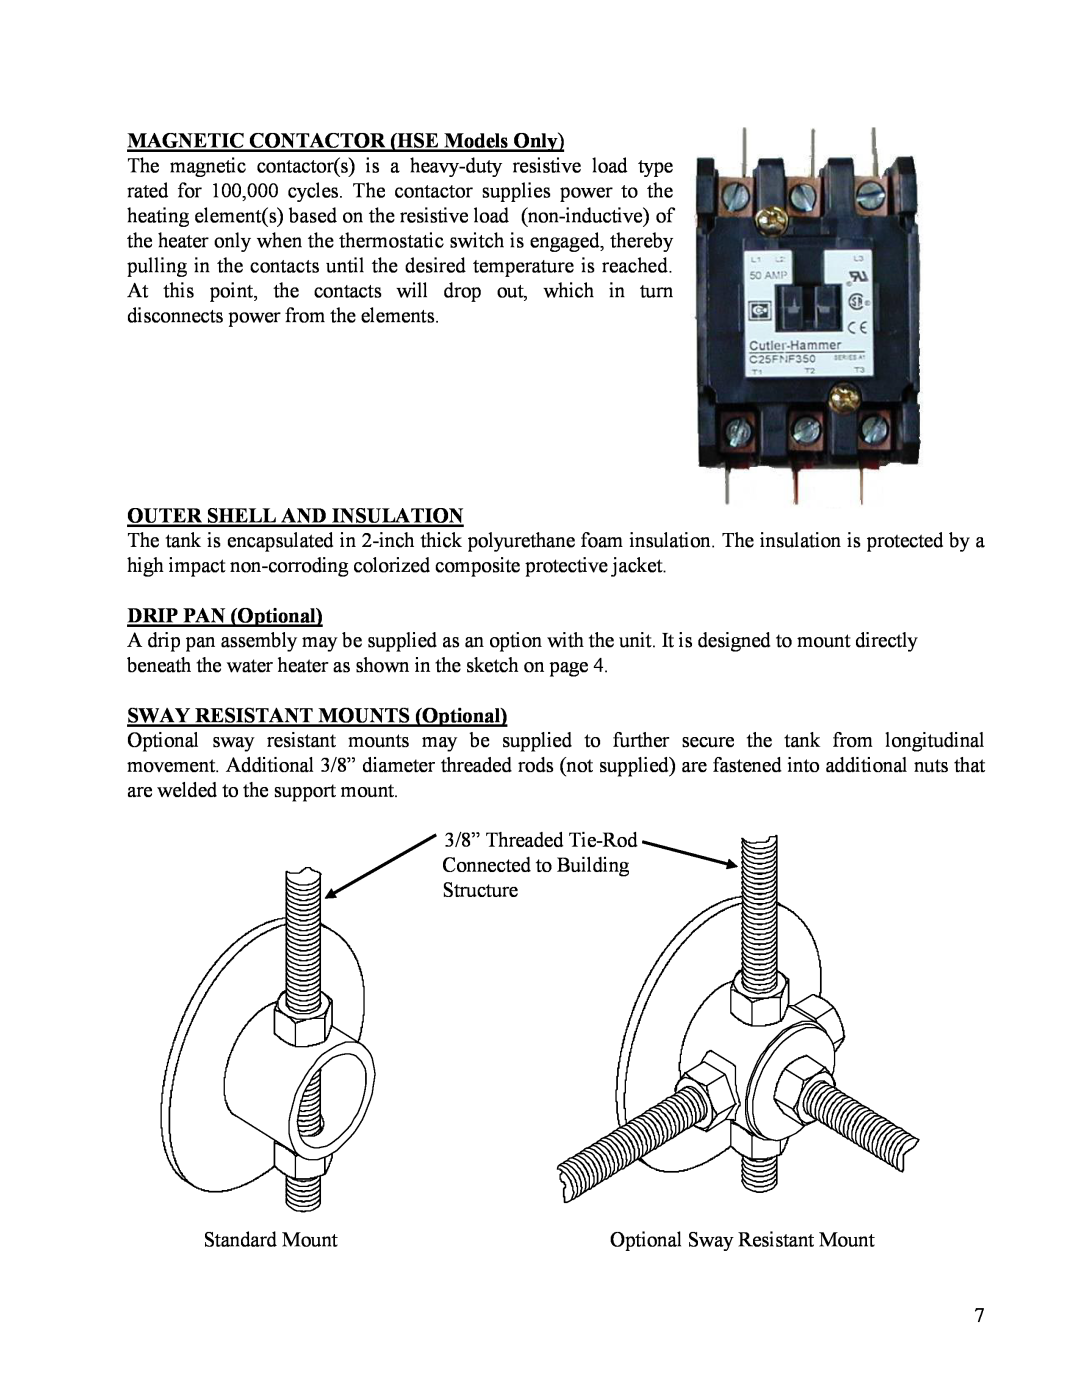 Hubbell Electric Heater Company HE manual MAGNETIC CONTACTOR HSE Models Only, Outer Shell And Insulation, DRIP PAN Optional 